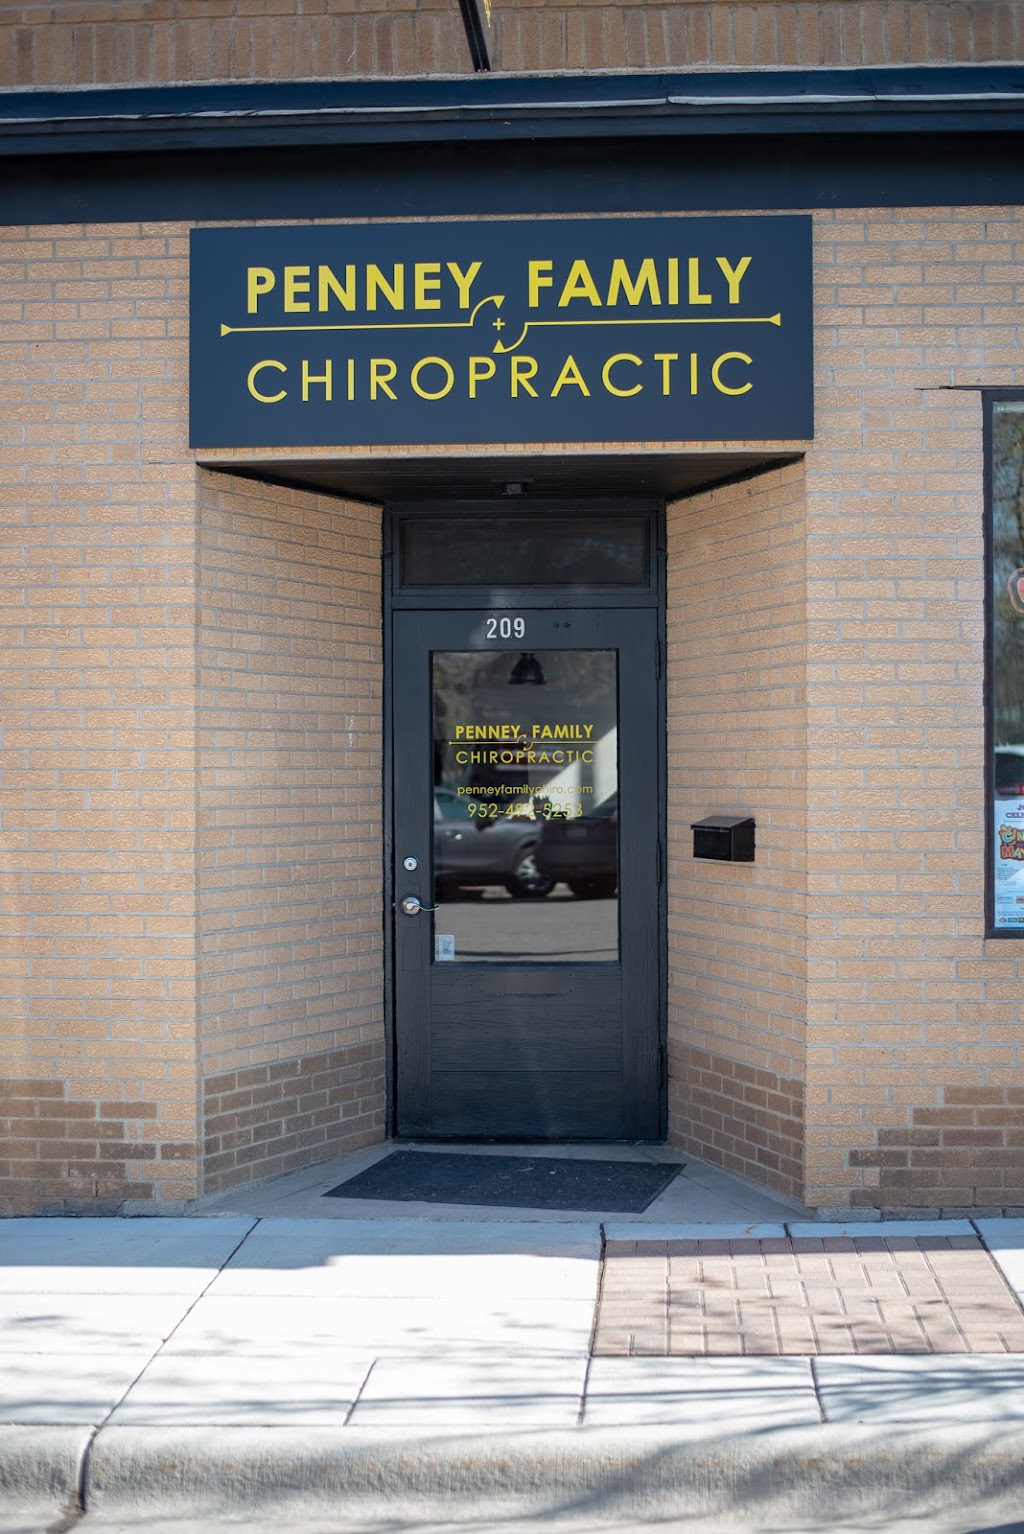 Penney Family Chiropractic | 209 Water St, Jordan, MN 55352 | Phone: (952) 492-5253